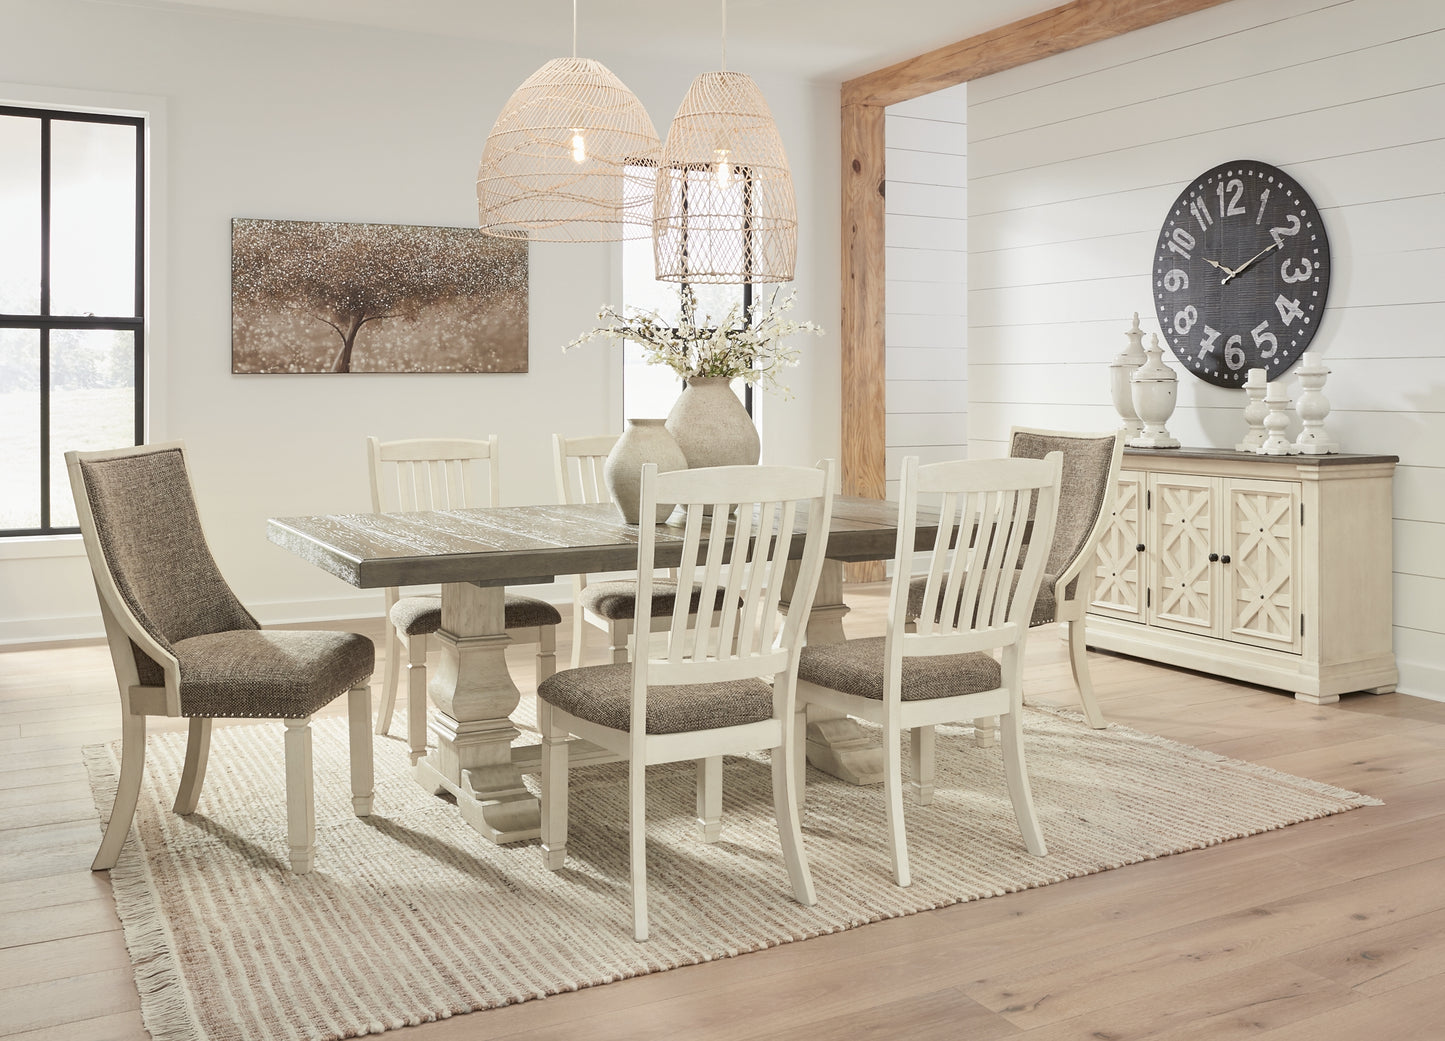 Bolanburg Dining Table and 6 Chairs with Storage JB's Furniture  Home Furniture, Home Decor, Furniture Store